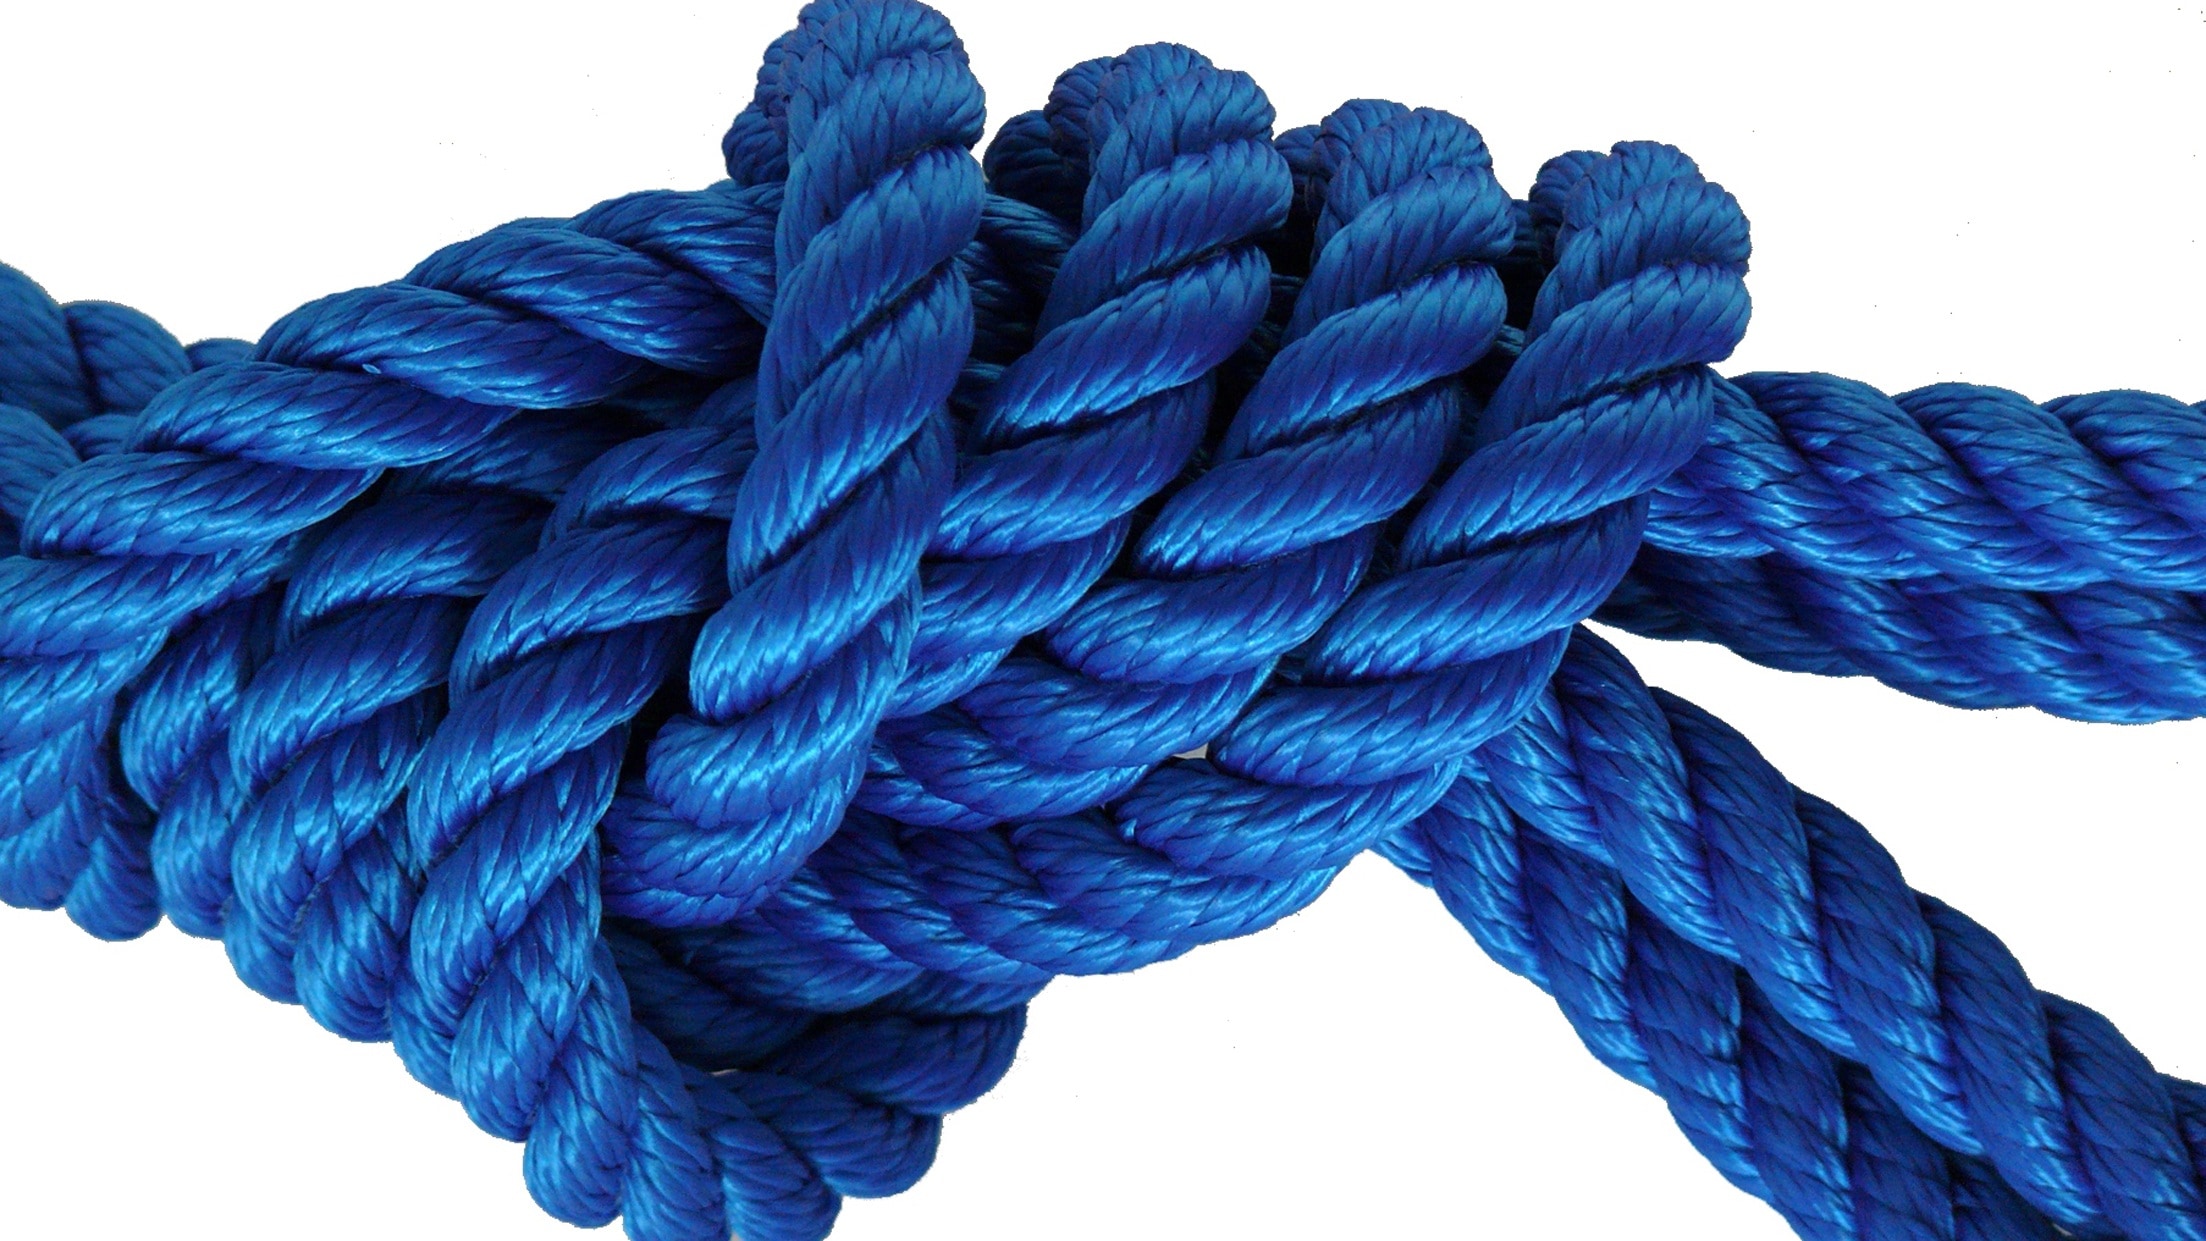 blue twisted rope